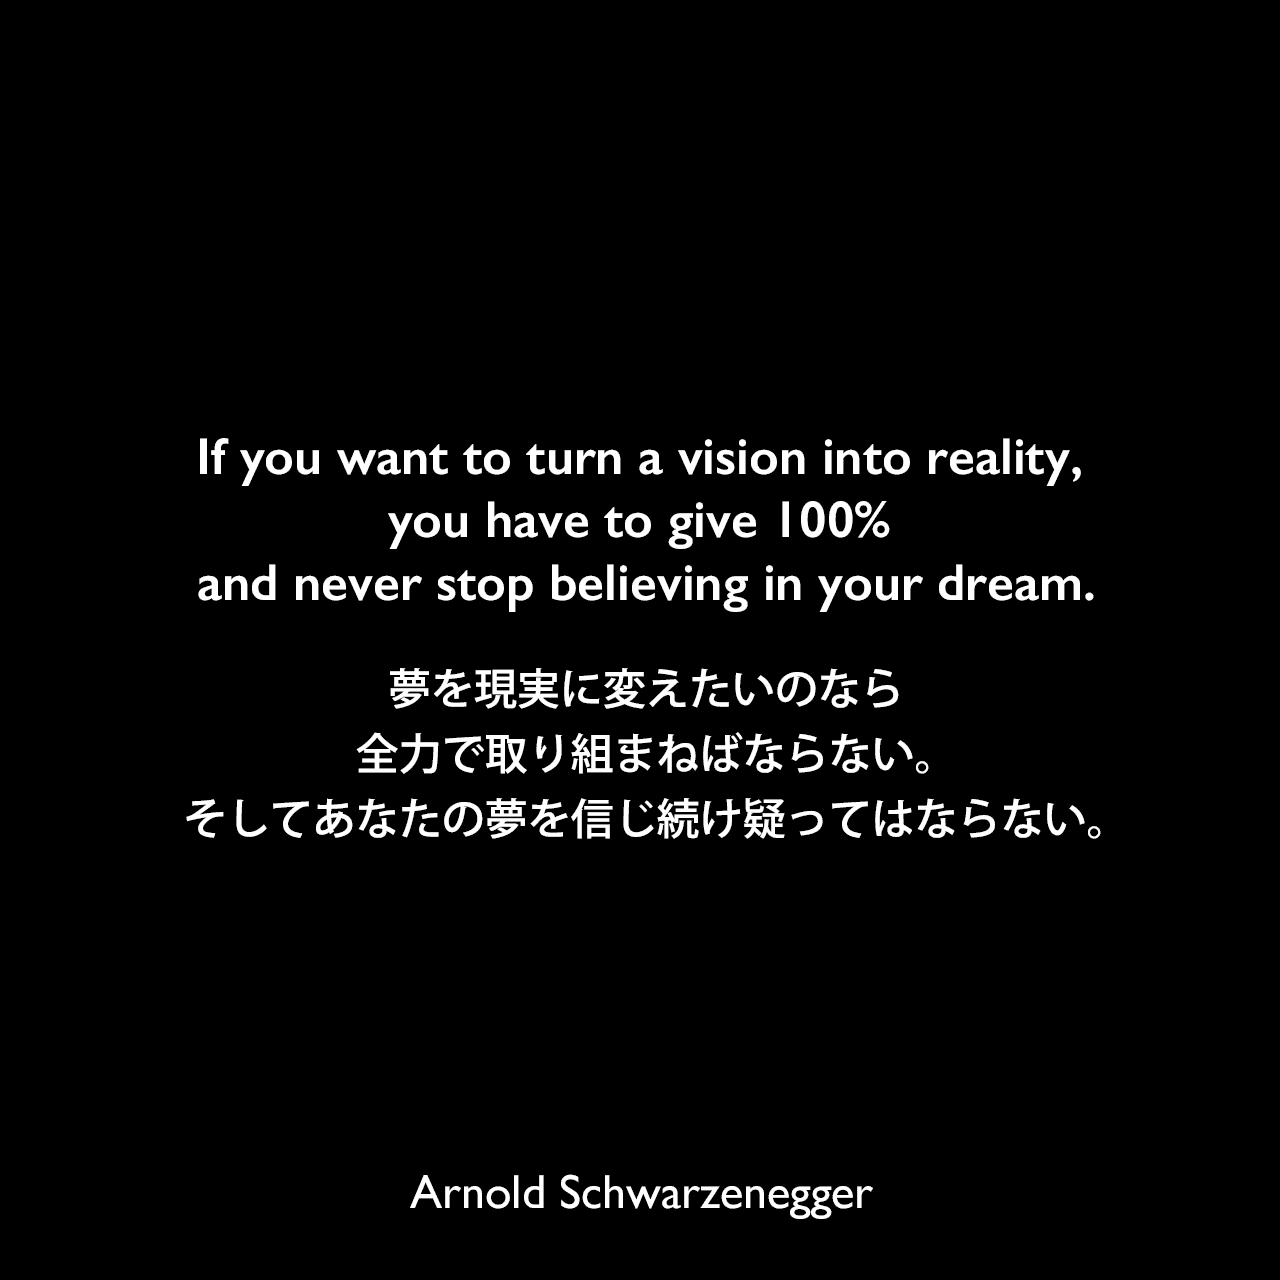 If you want to turn a vision into reality, you have to give 100% and never stop believing in your dream.夢を現実に変えたいのなら、全力で取り組まねばならない。そしてあなたの夢を信じ続け疑ってはならない。